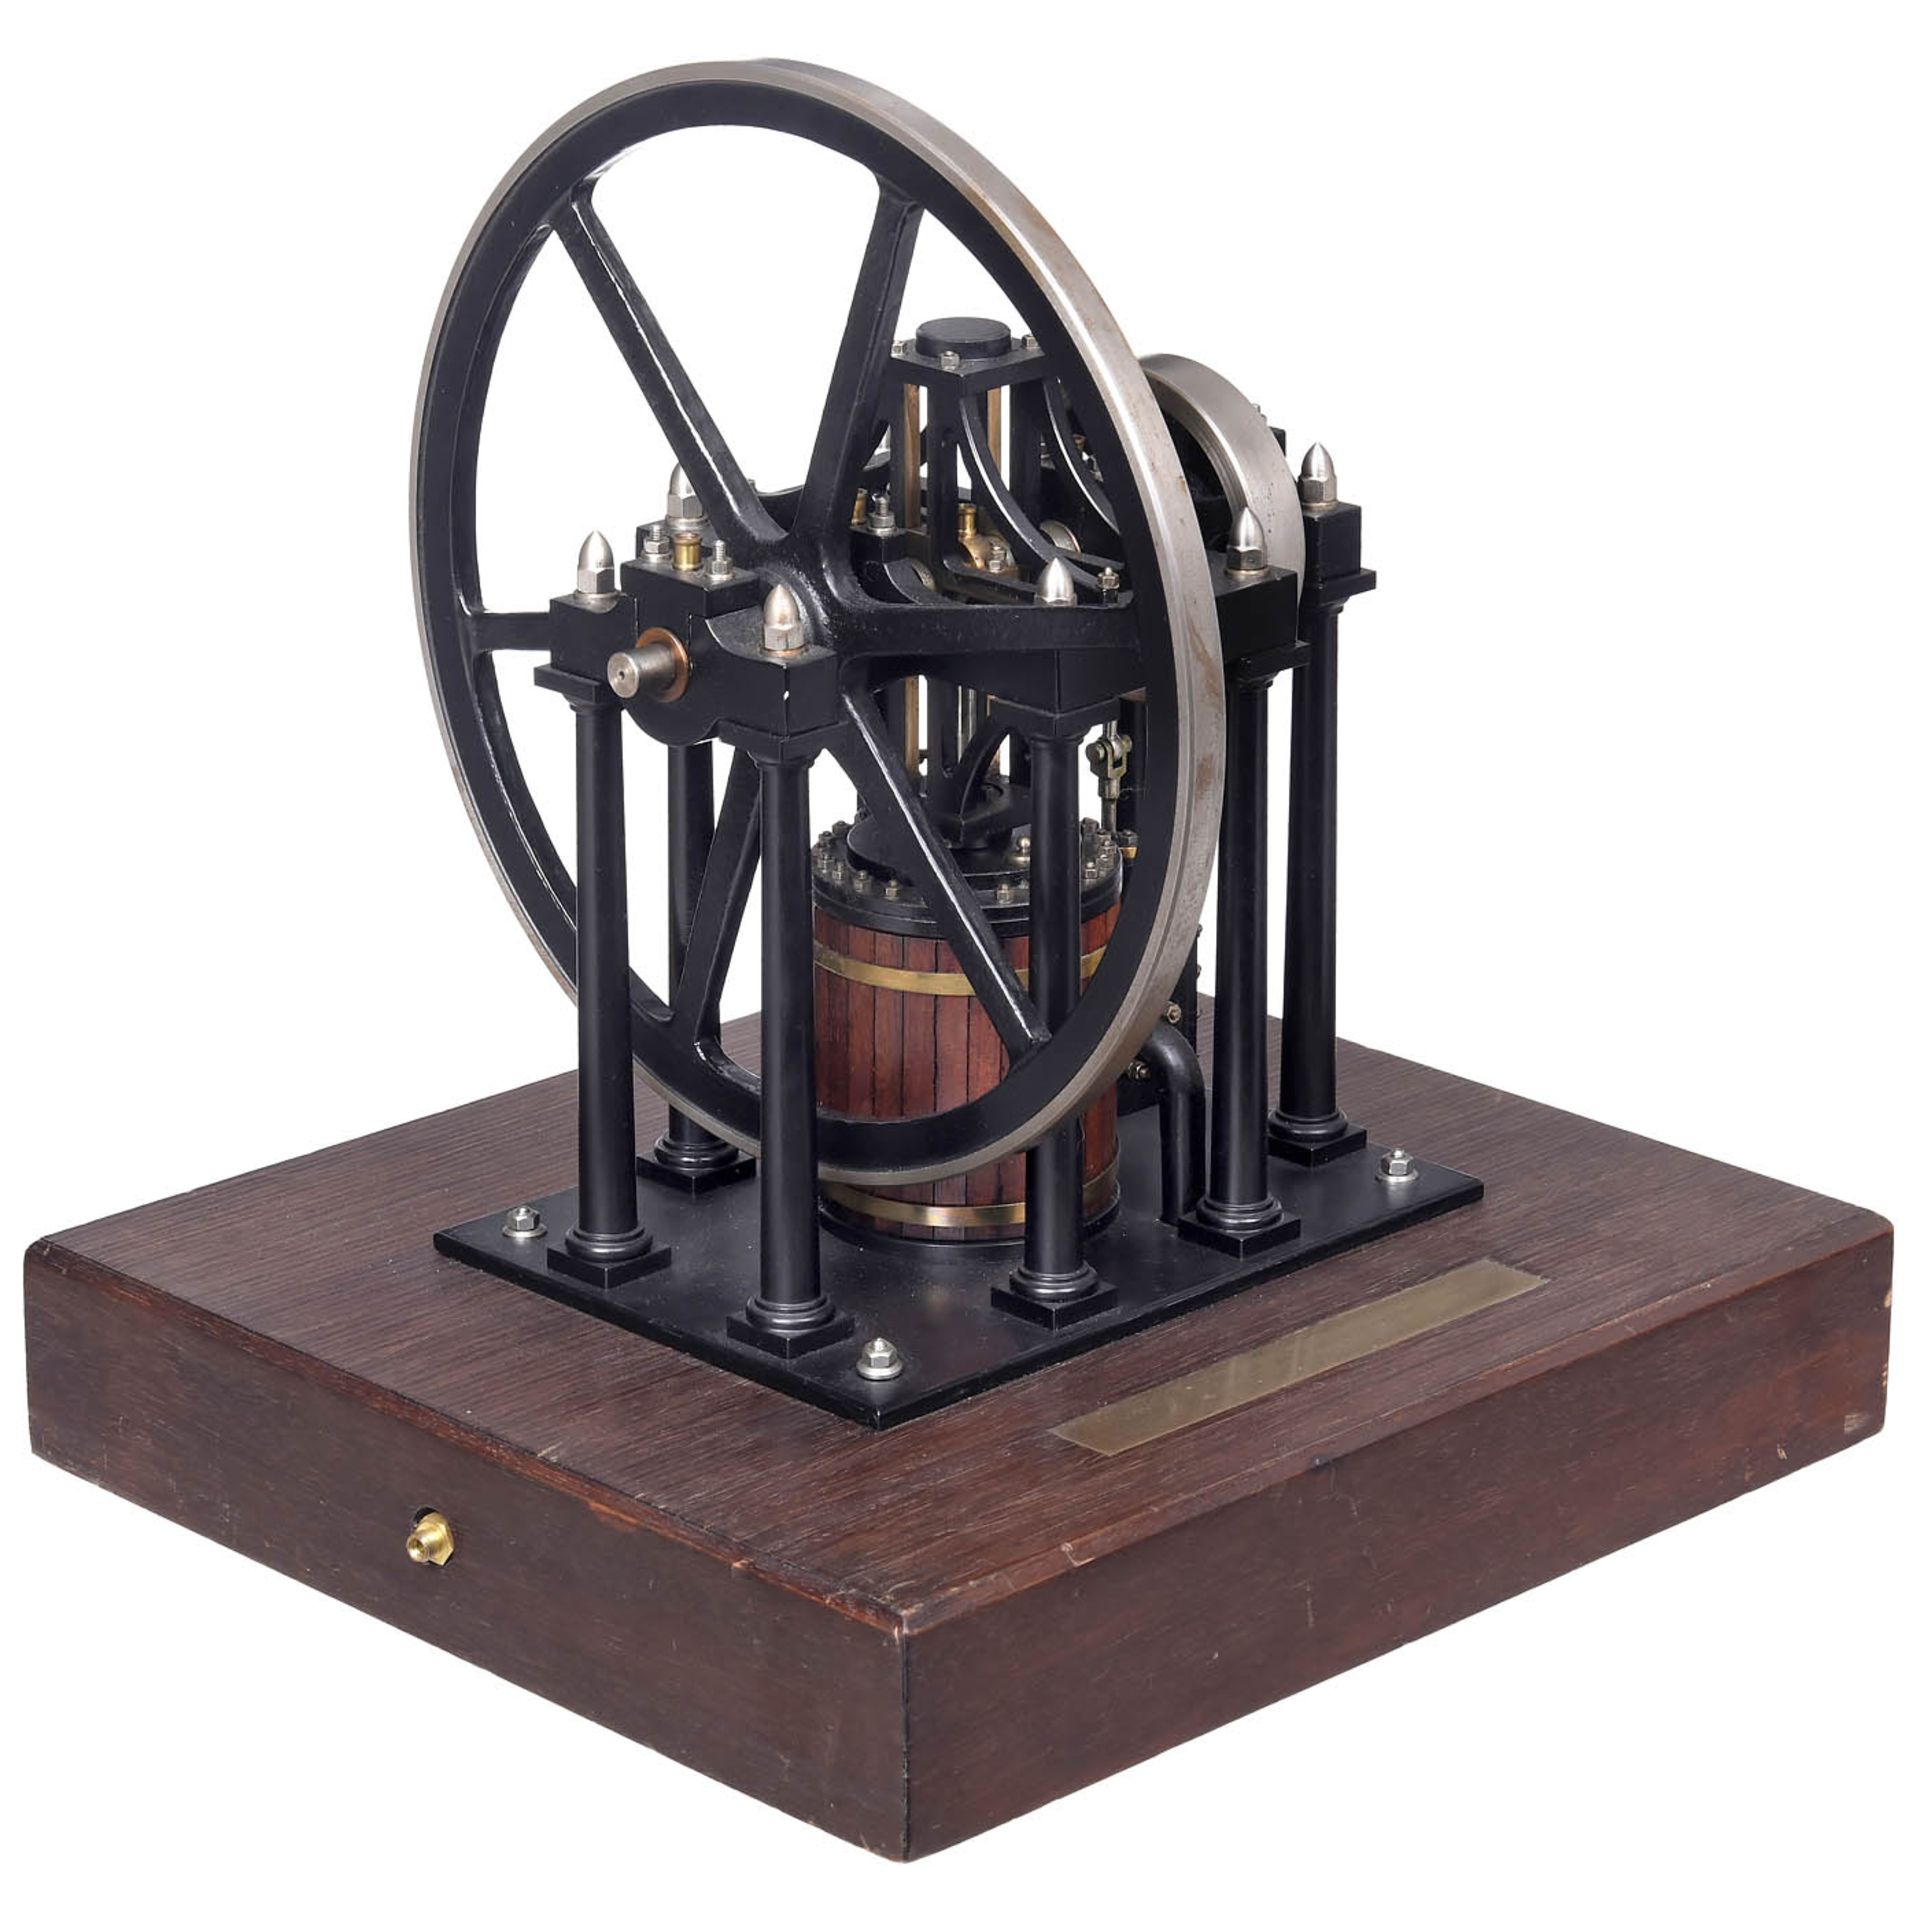 Model of the James Booth's Rectilinear Engine from 1843 - Bild 3 aus 4